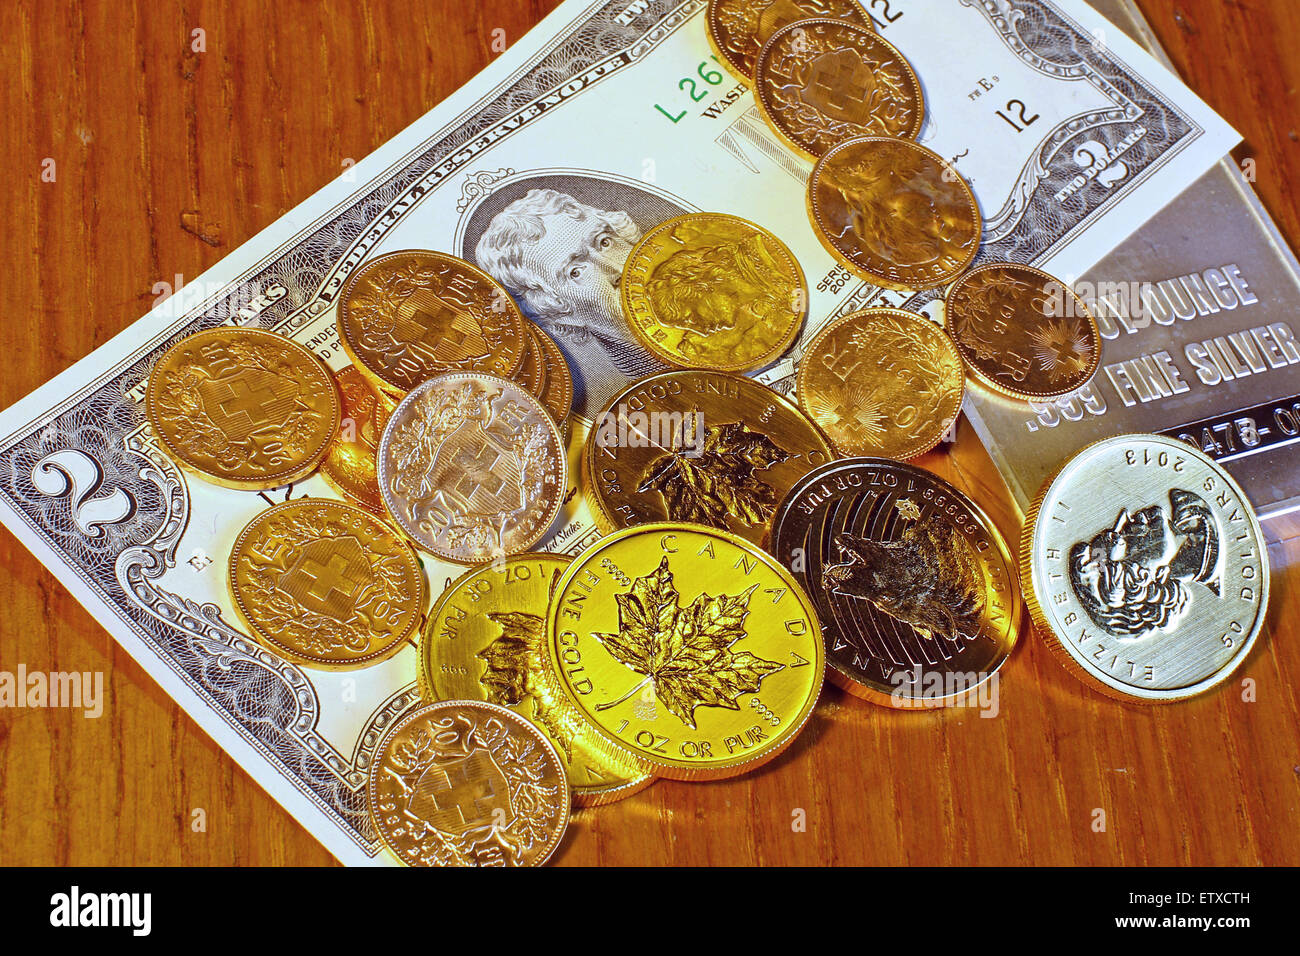 Savings over time gold vs paper currency concept Stock Photo